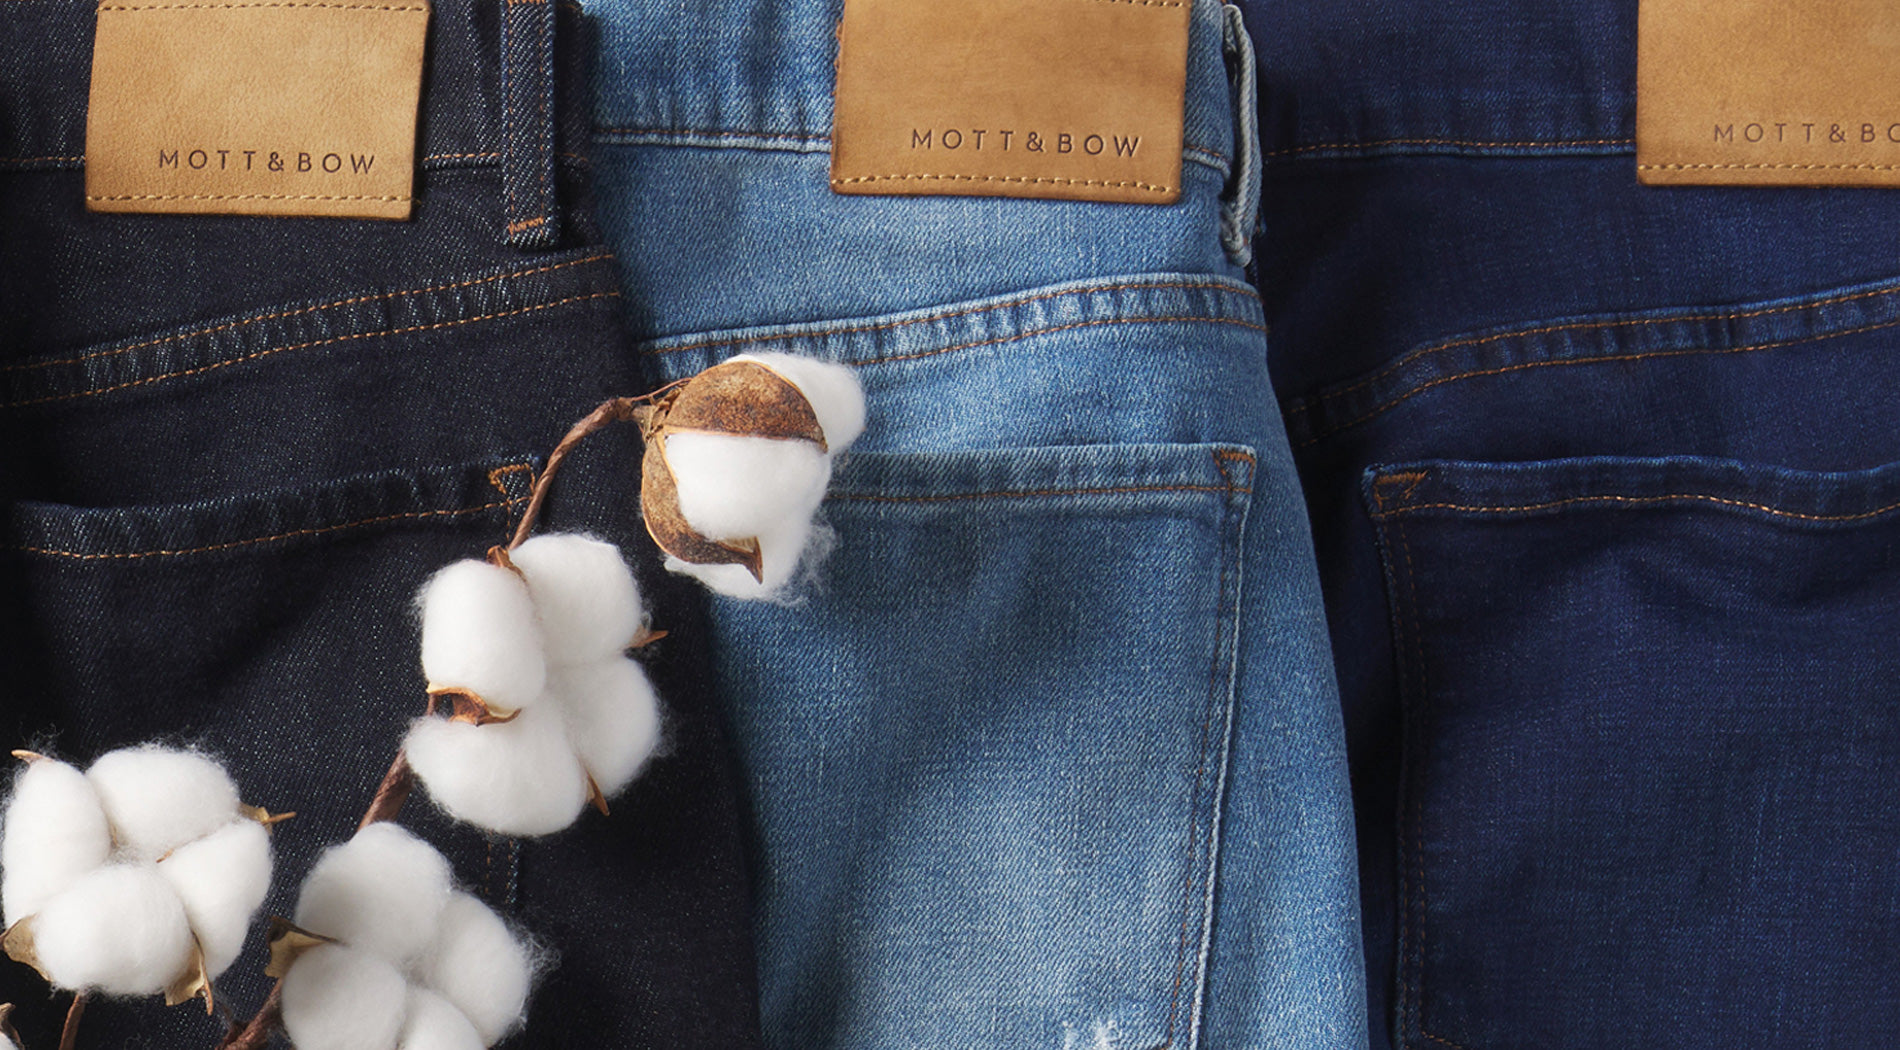 5 Steps To Removing Blood From Your Raw Denim